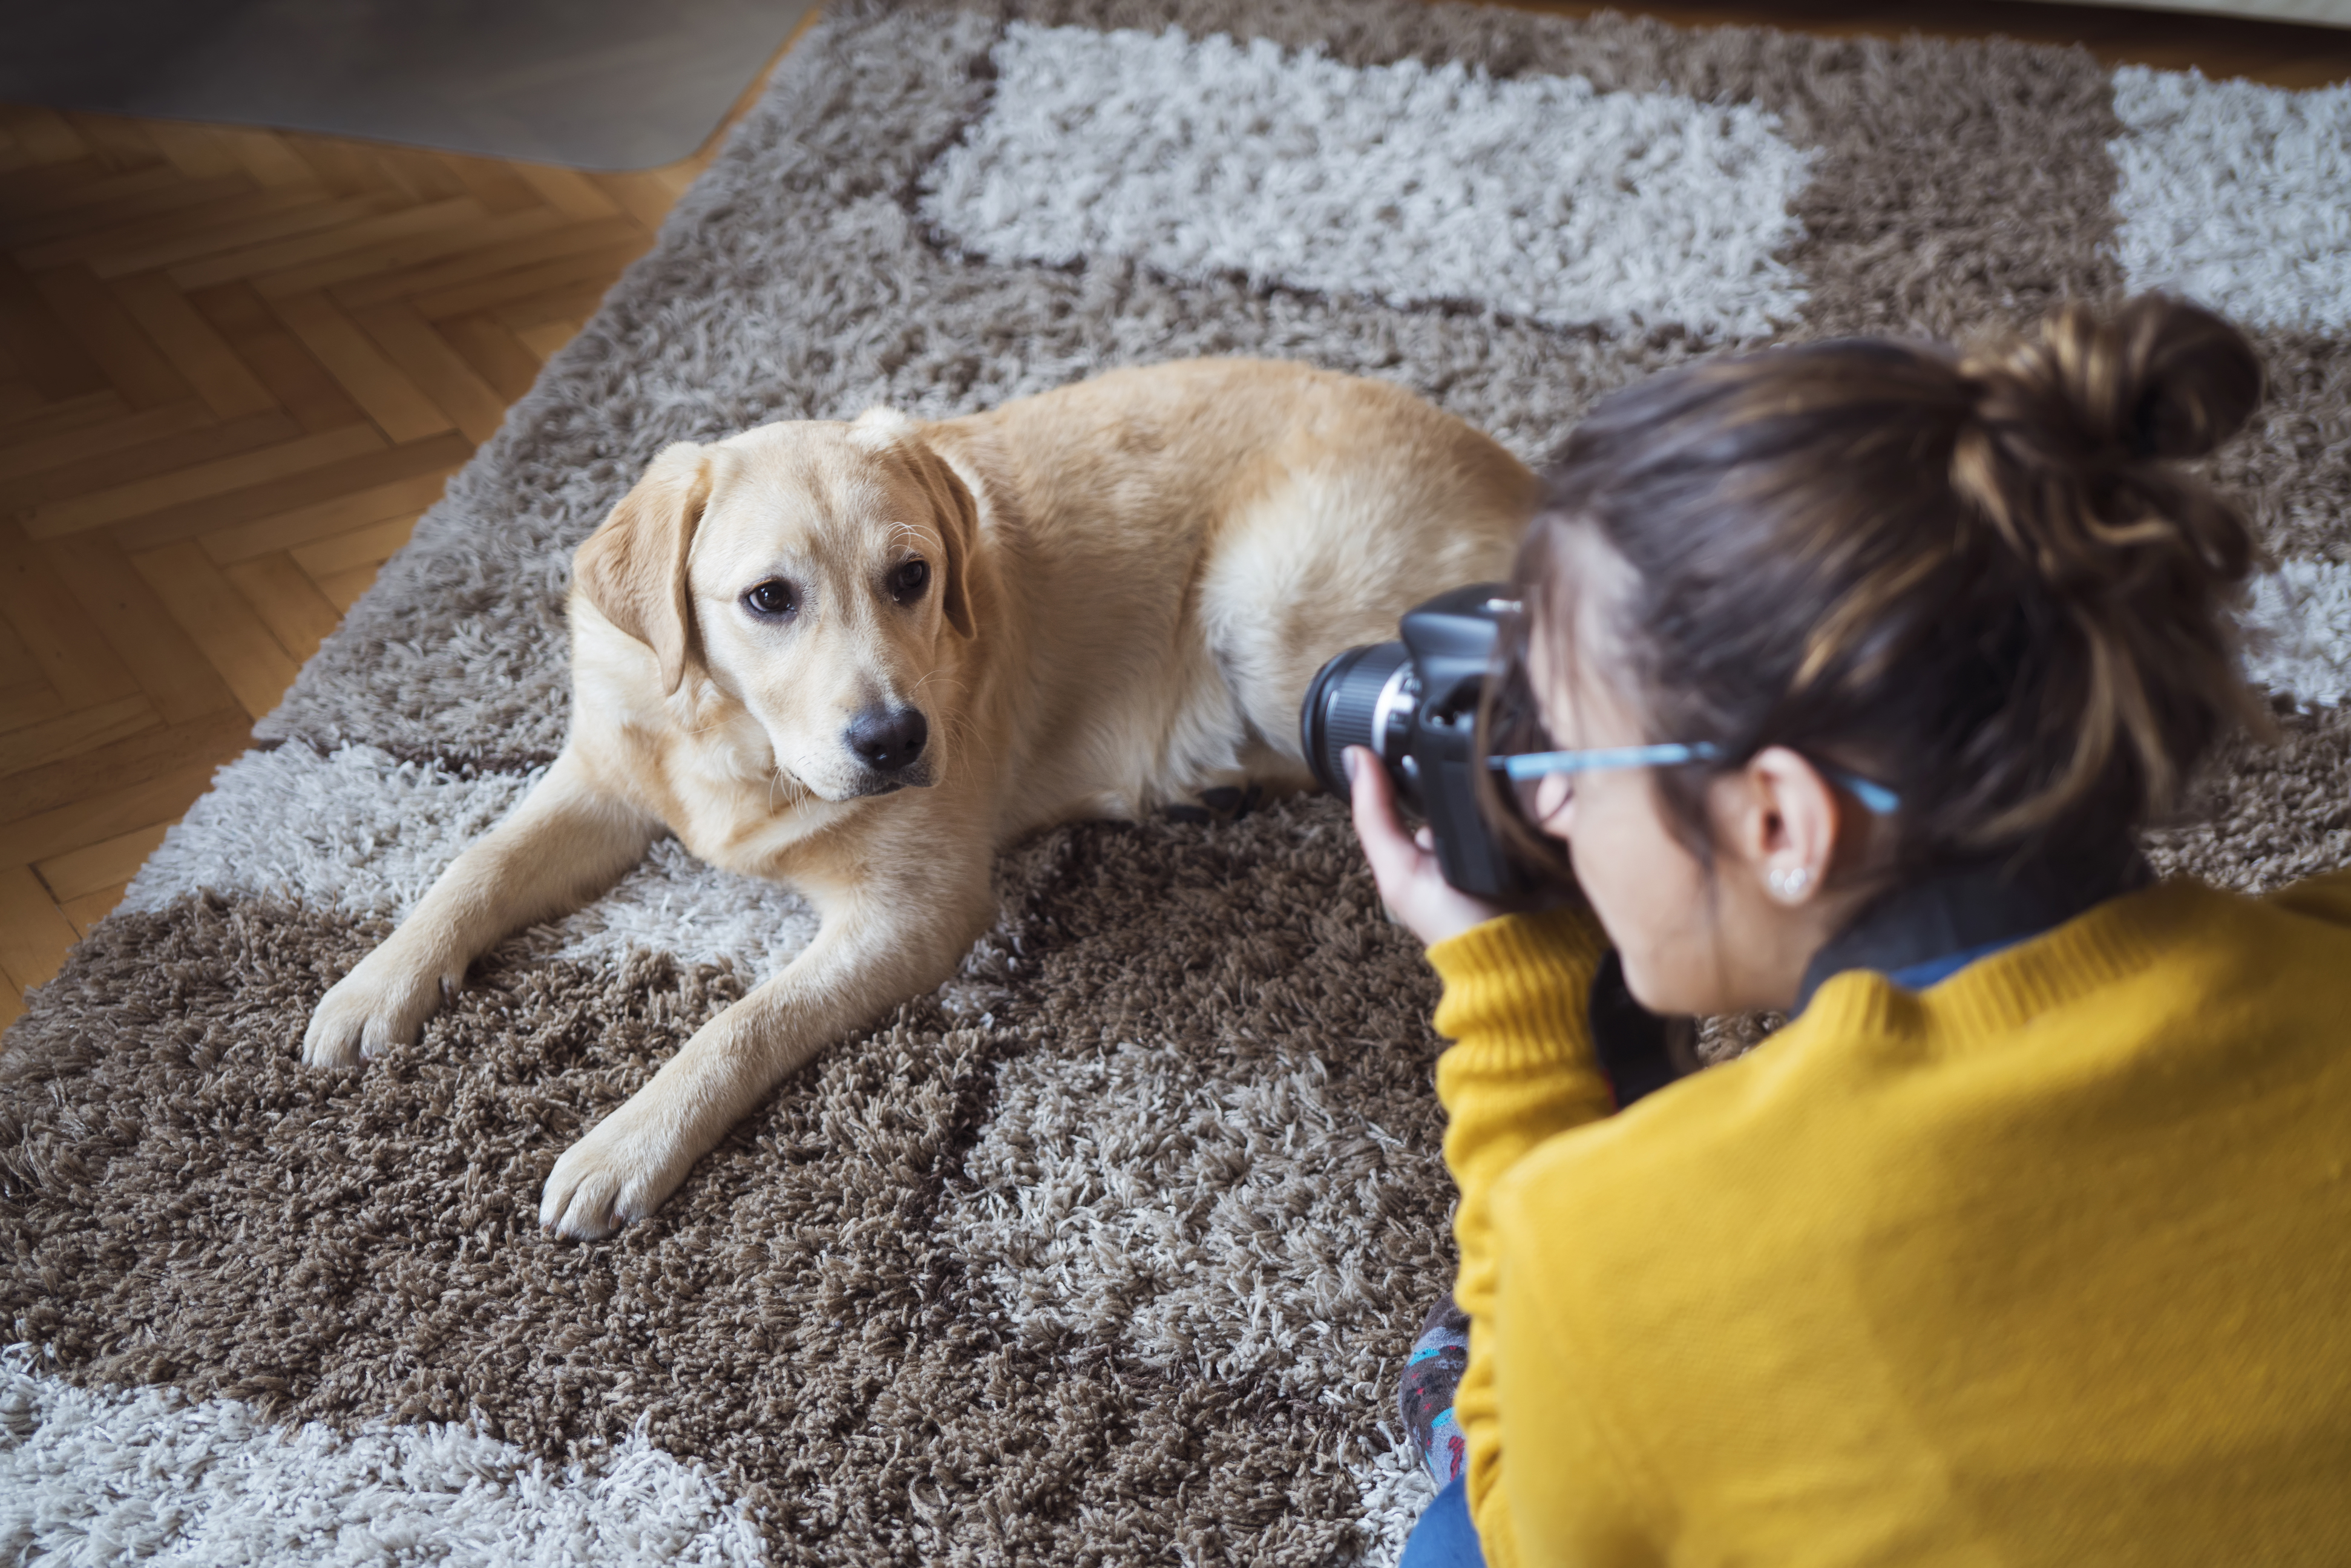 photography resized, A person taking a photo of a Labrador who is laying down.